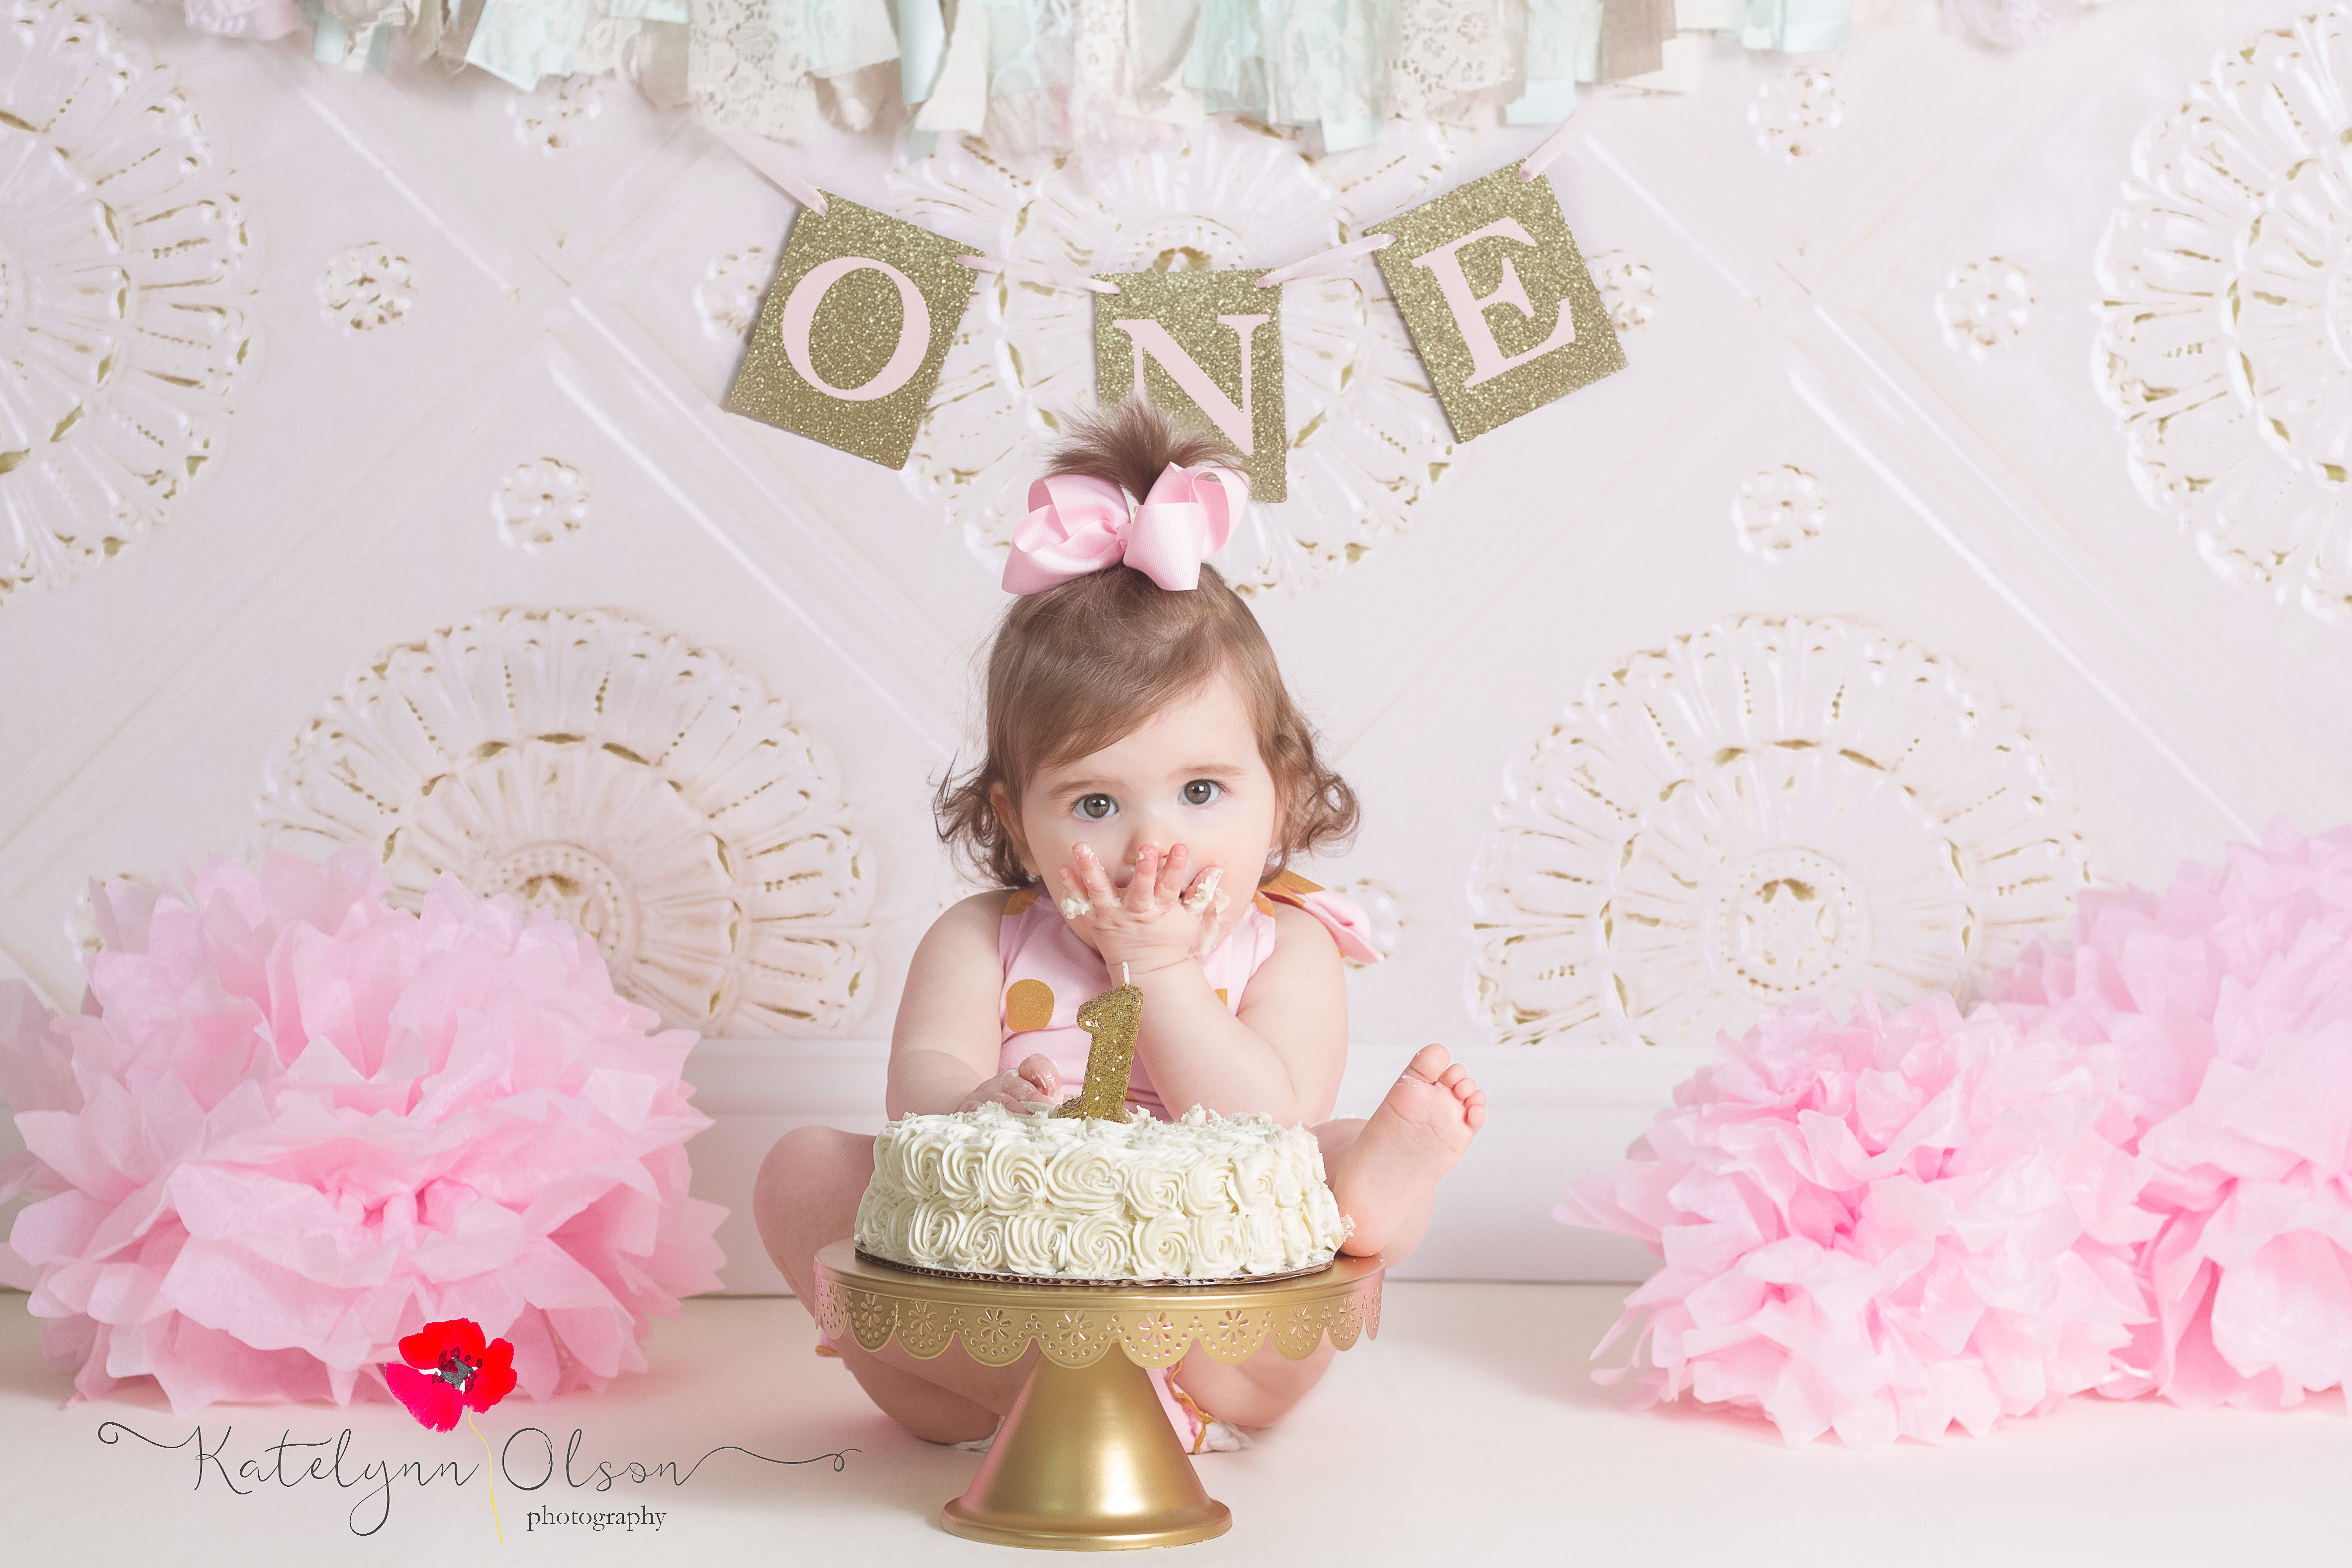 Now this baby LOVES cake!